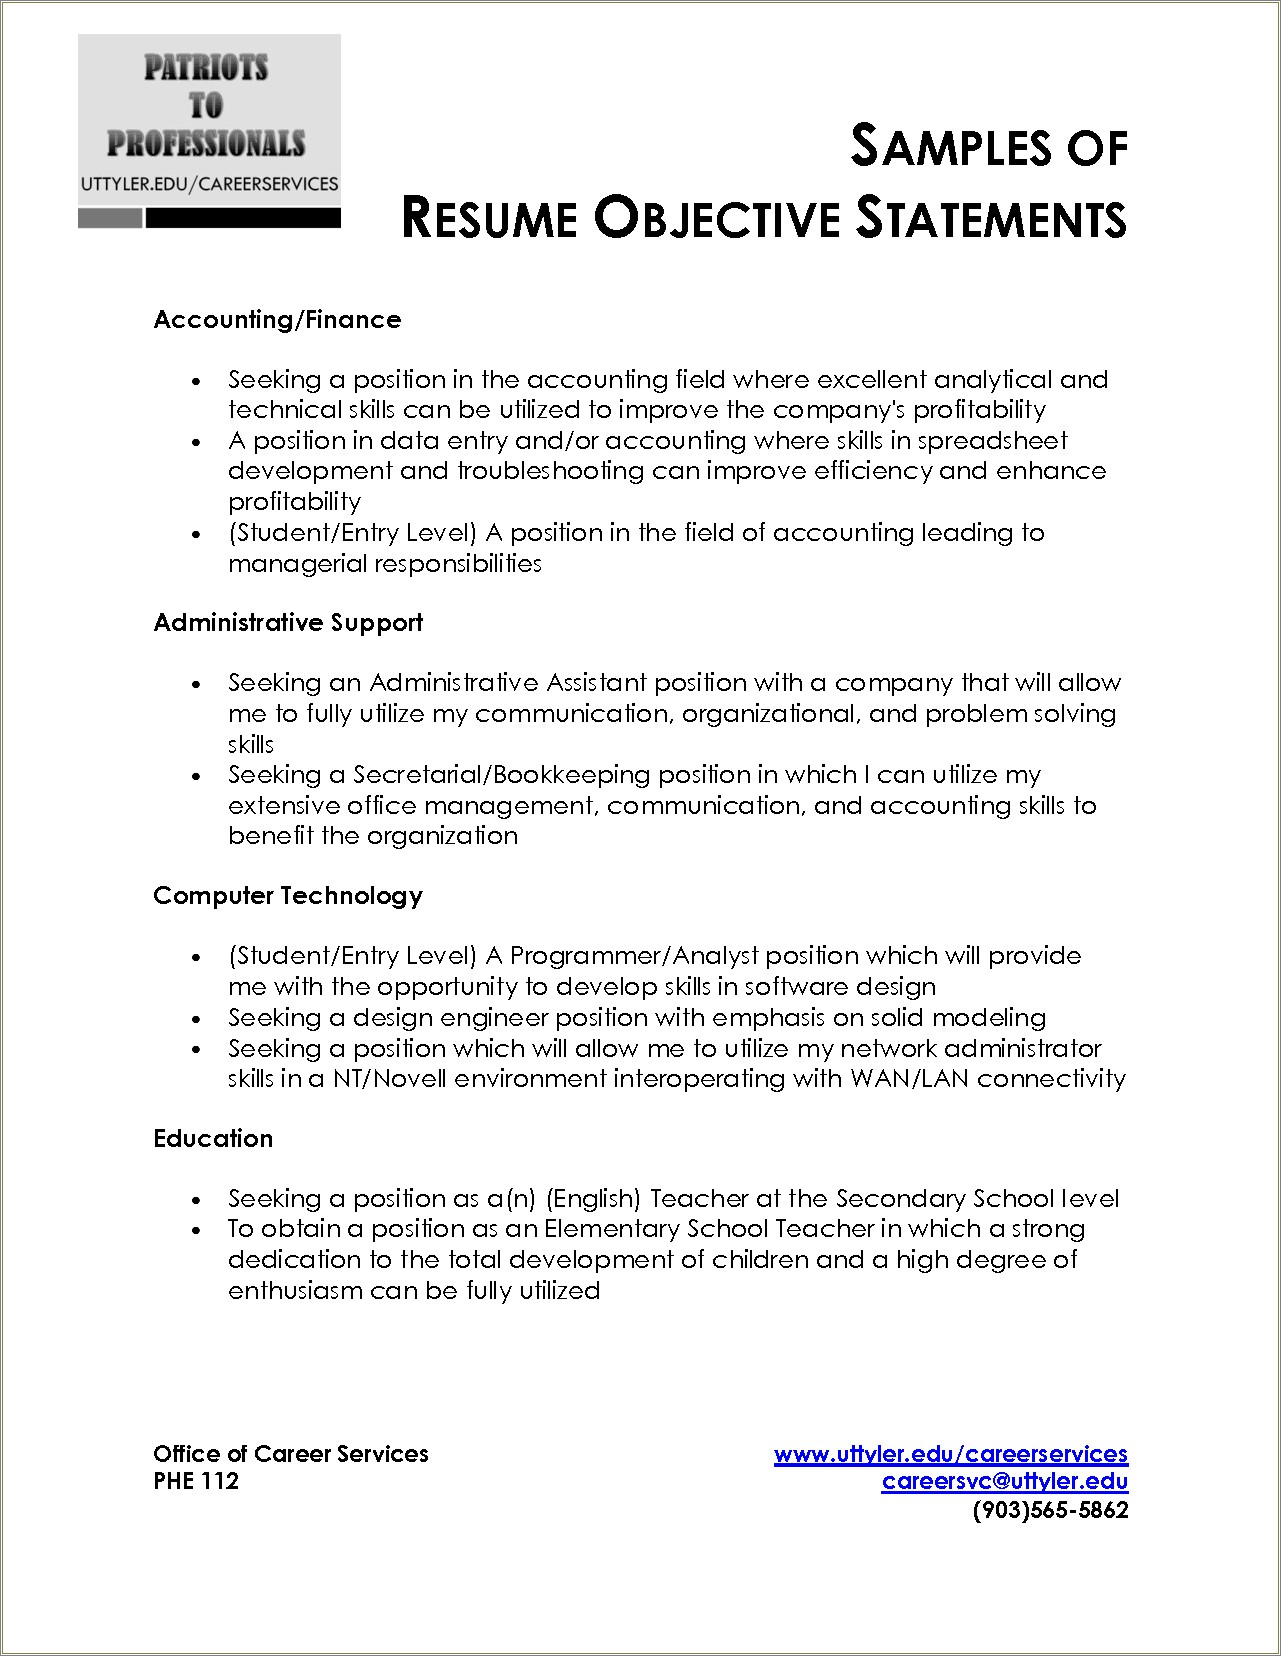 A Good Objective Statement For A Student Resume